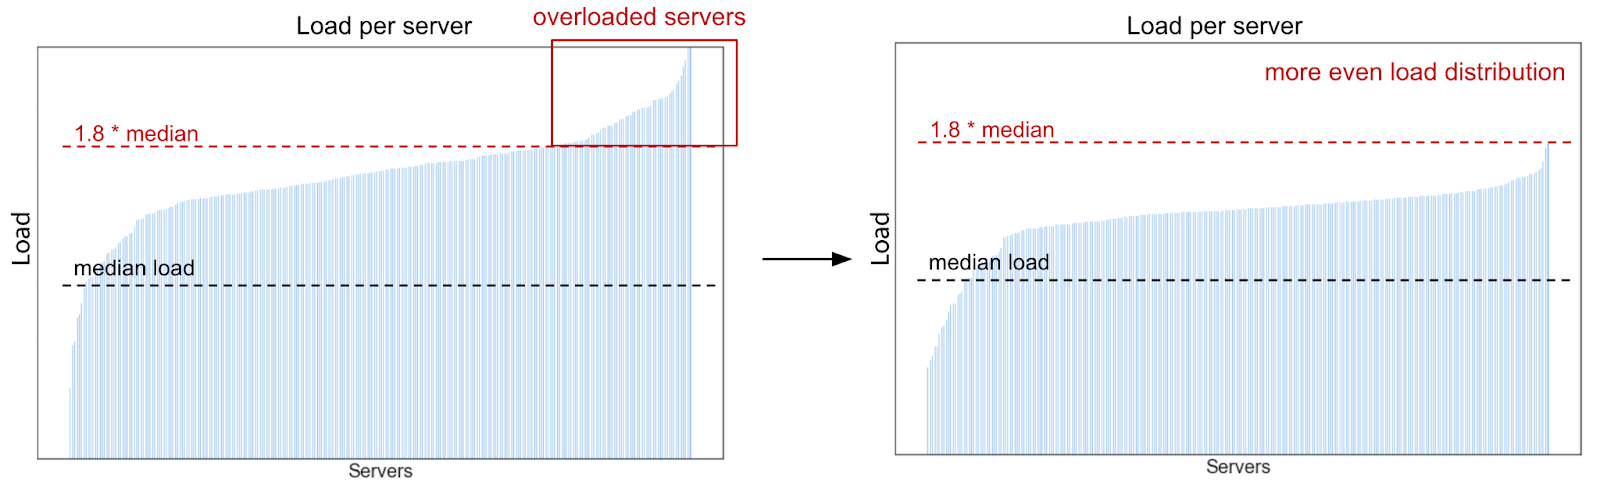 Change in load distribution with Adaptive Load Balancing